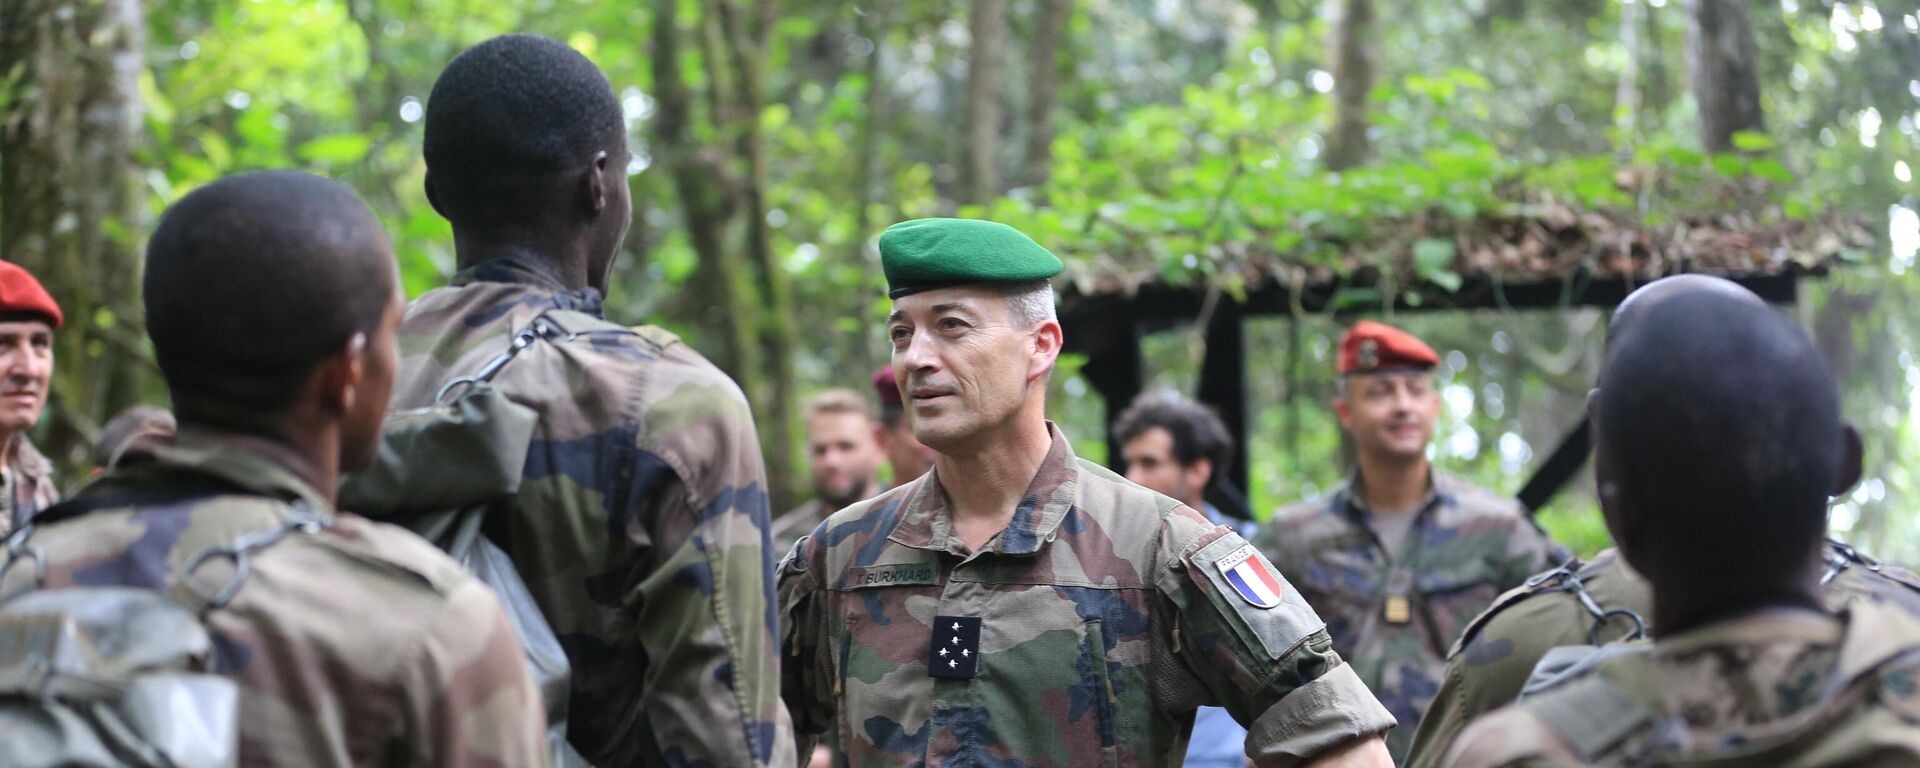 General Thierry Burkhard, French Army Chief of the Defence Staff, talks on April 15, 2022 to a group of soldiers from Cameroon, Chad, Gabon, Democratic republic of Congo, Republic of Congo and Central African Republic taking part in a training at the Raponda Walker Arboretum forest in Akanda, Gabon - Sputnik Africa, 1920, 02.03.2023